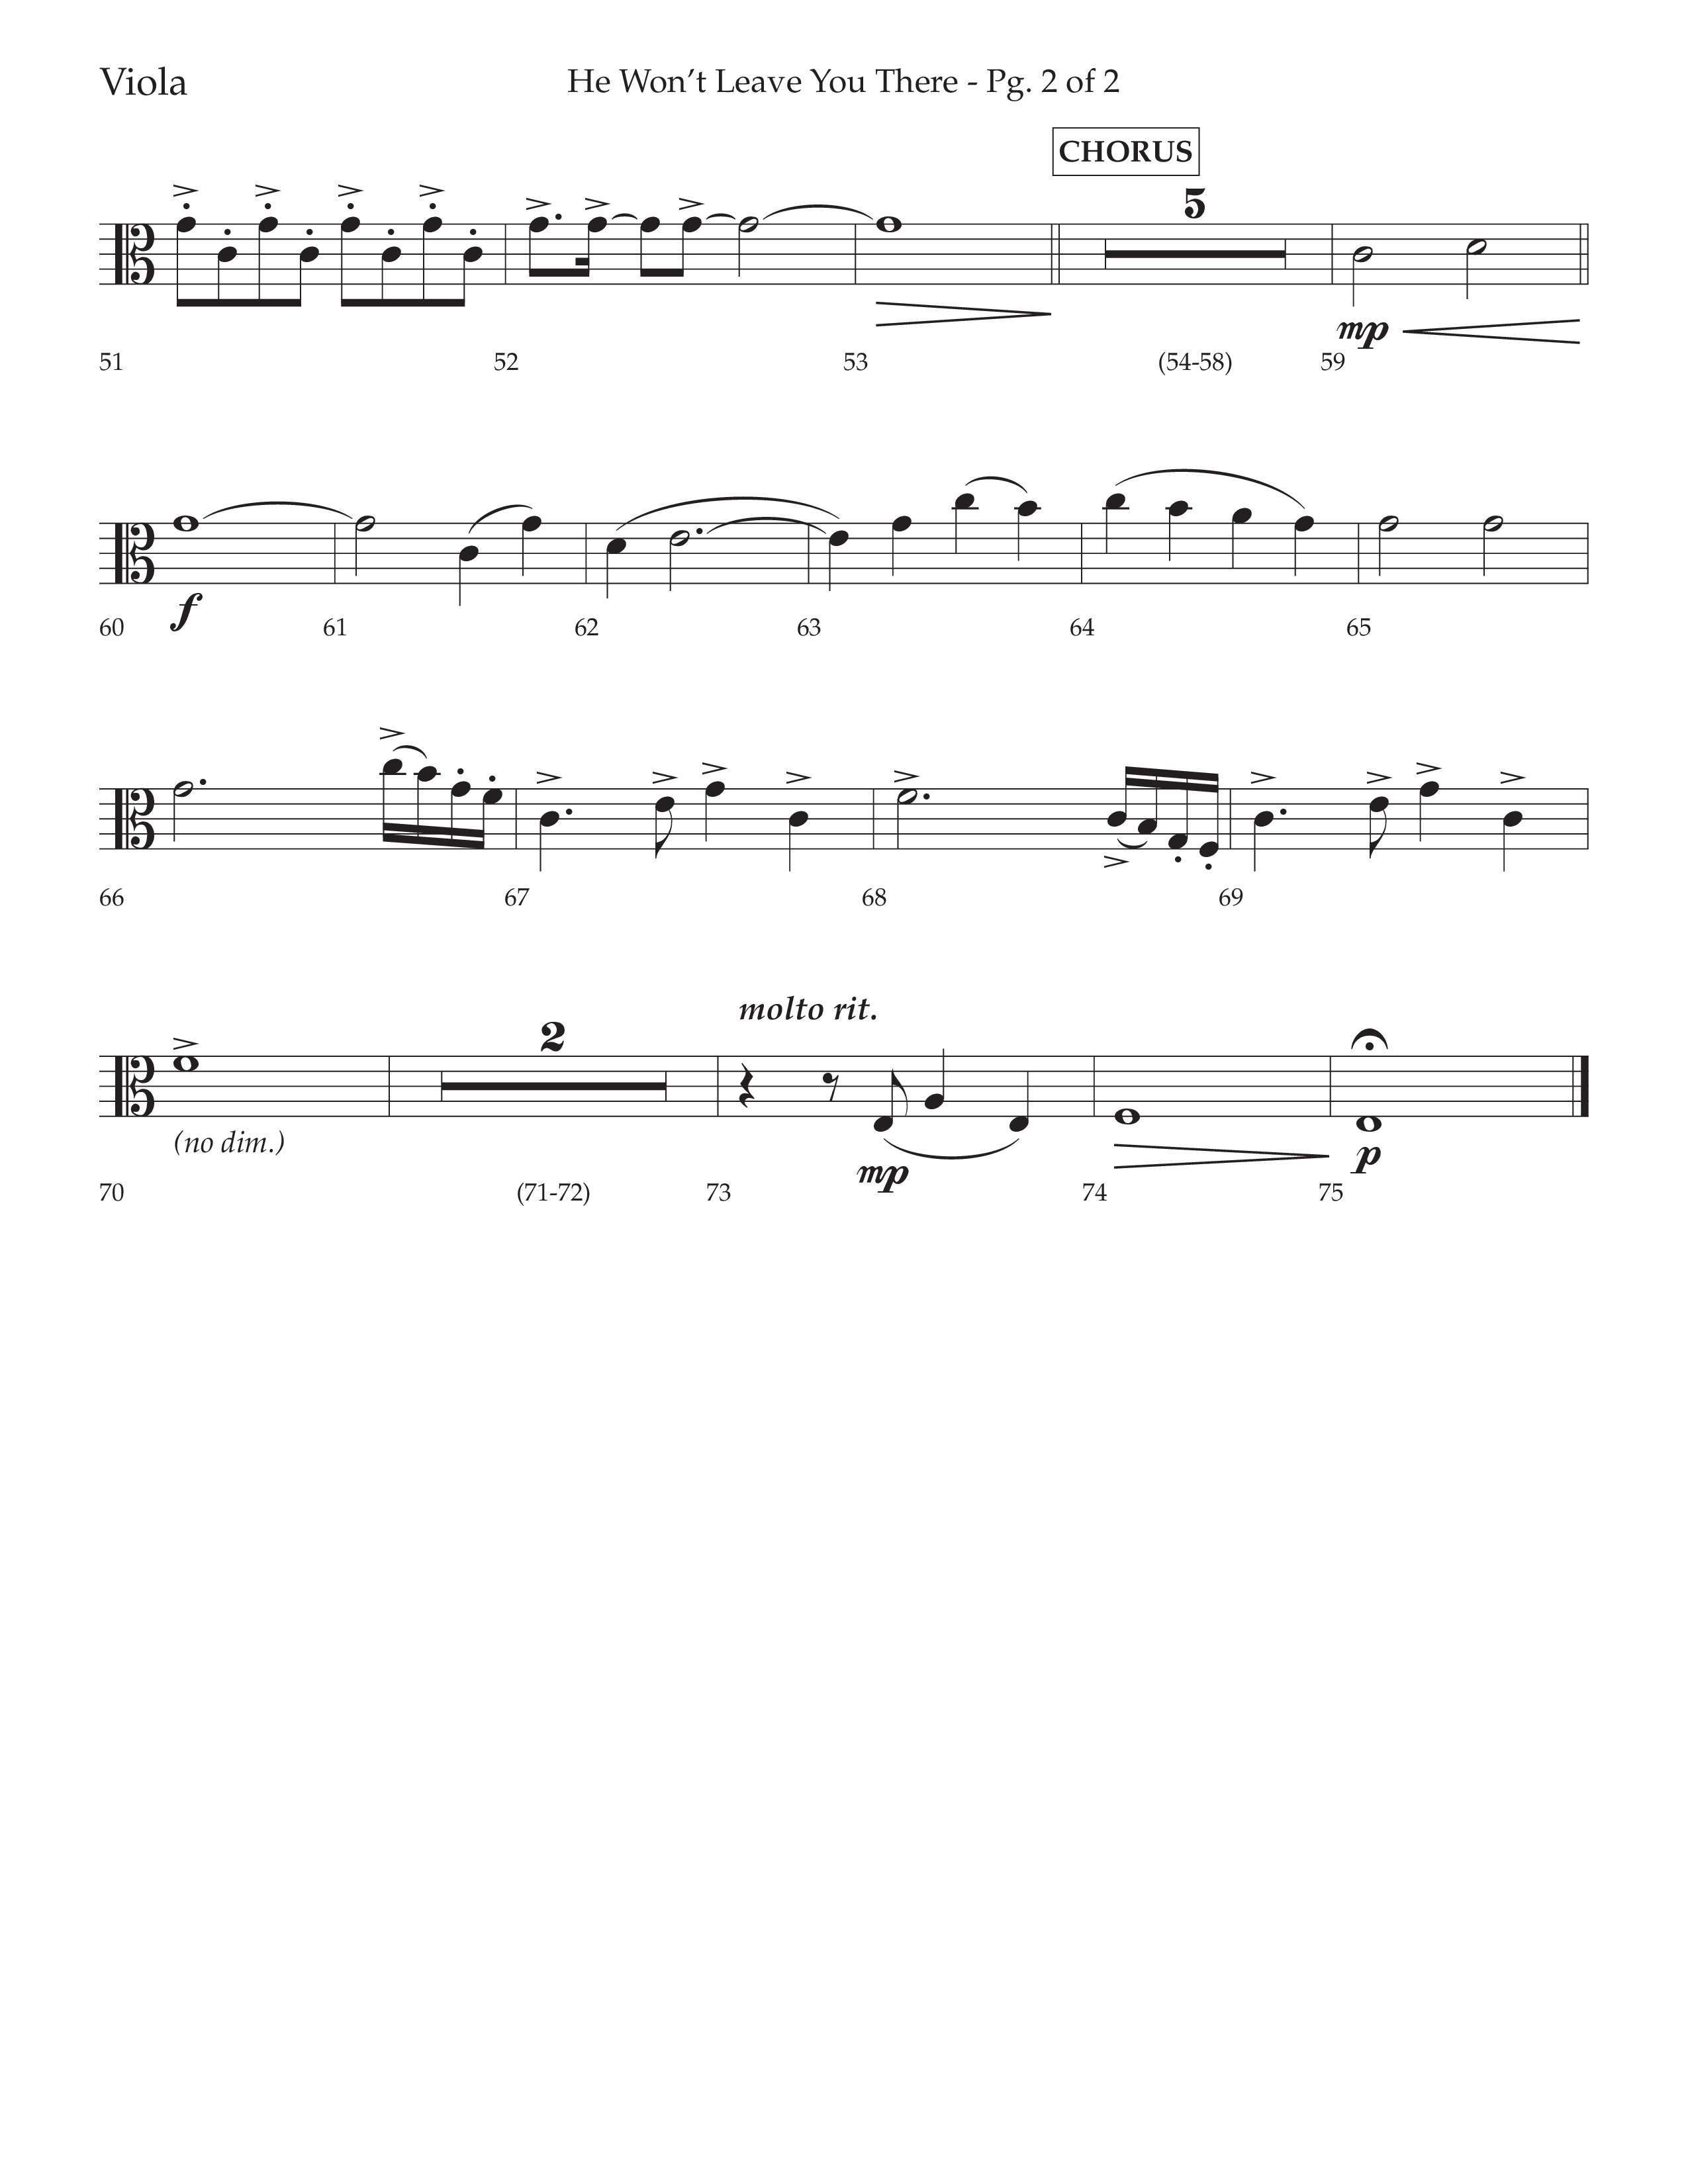 He Won't Leave You There (Choral Anthem SATB) Viola (Lifeway Choral / Arr. David Wise / Orch. David Shipps)